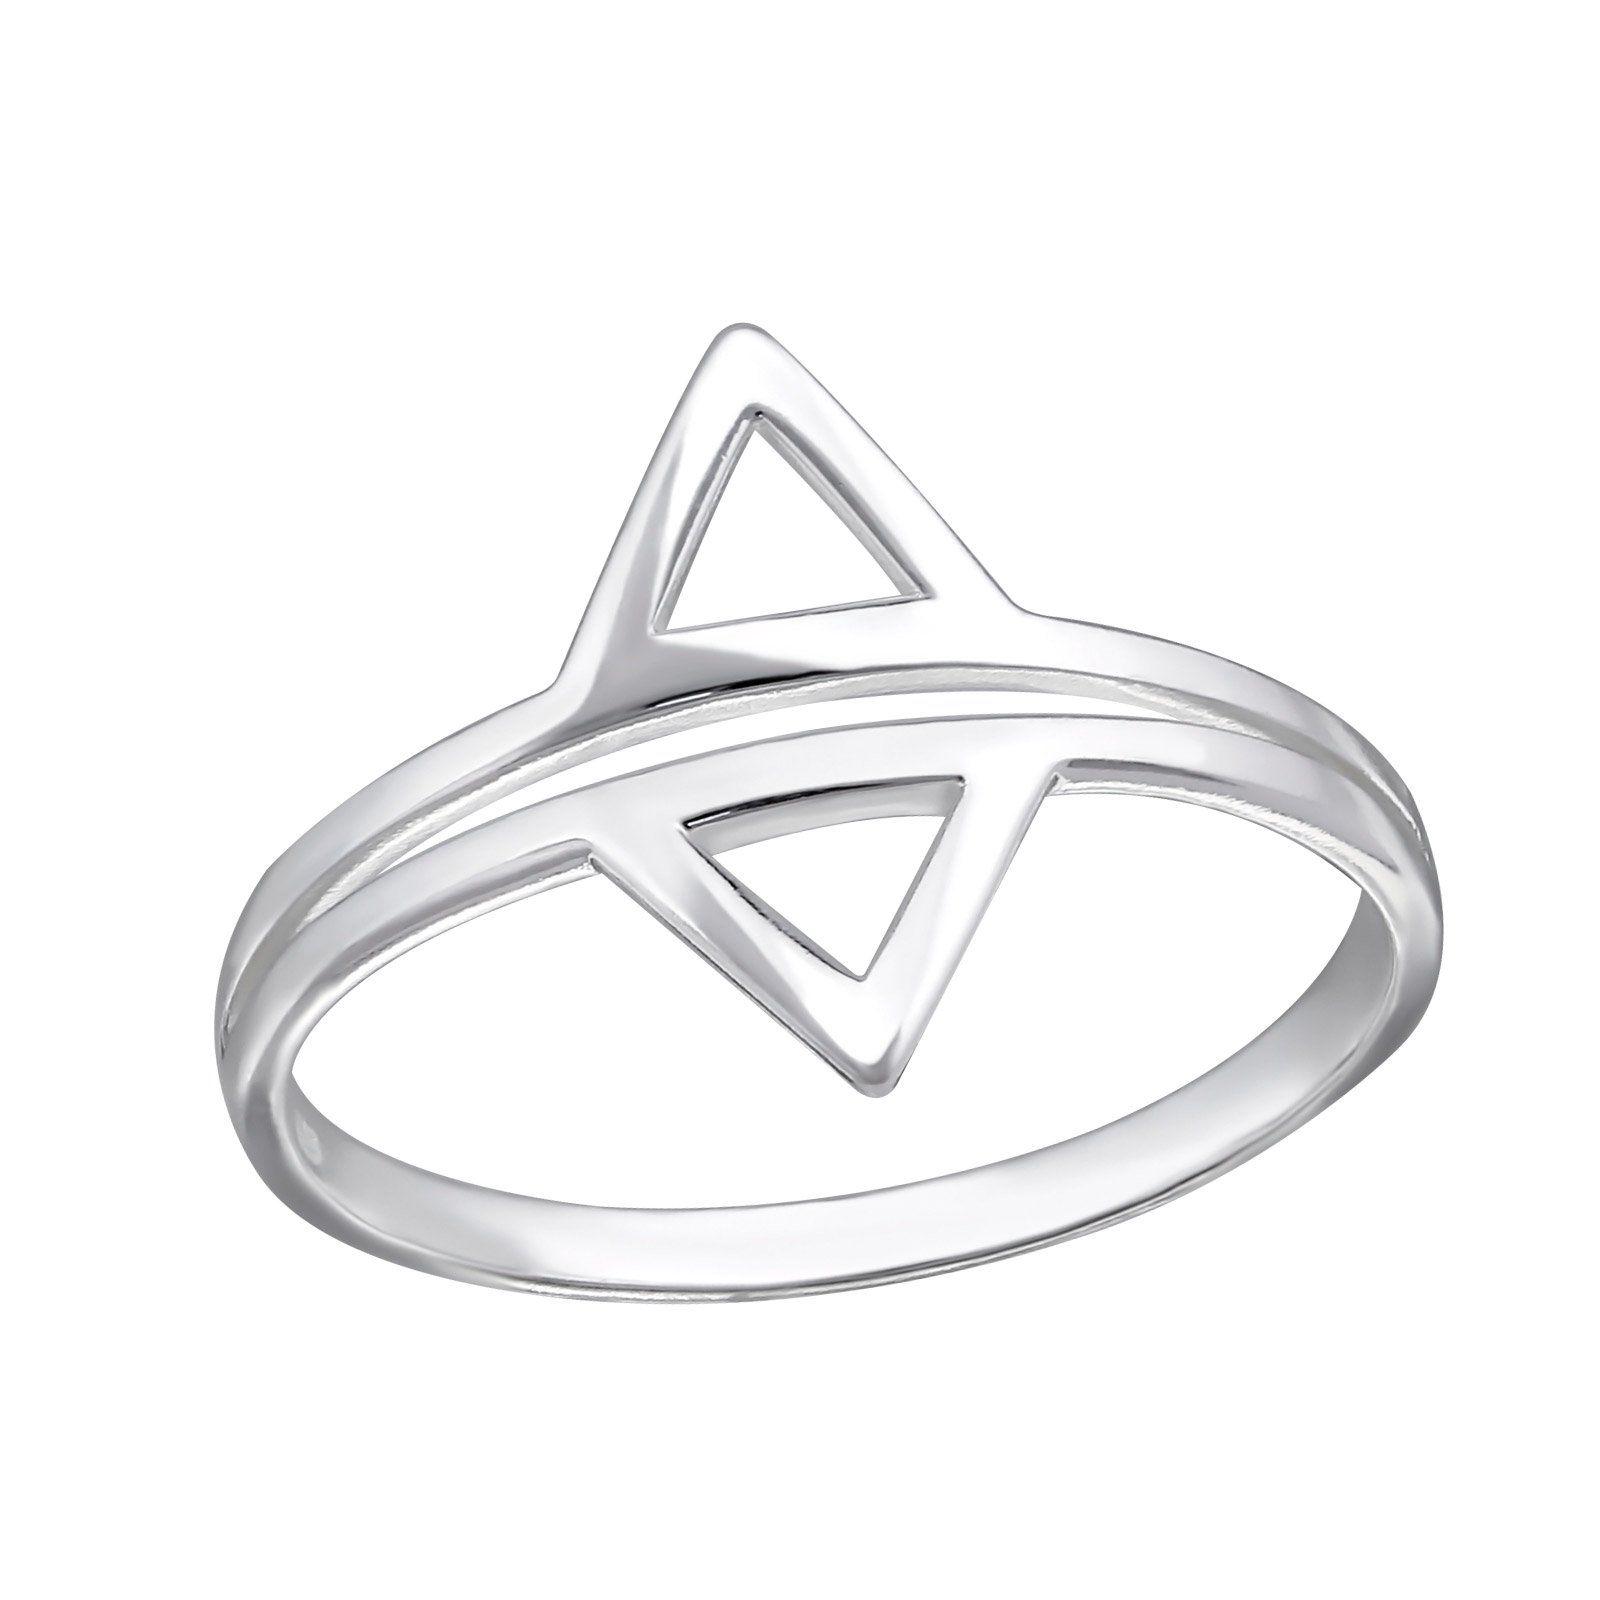 Silver Triangle Logo - Double Triangle Cut Out Sterling Silver Ring – I love silver jewellery